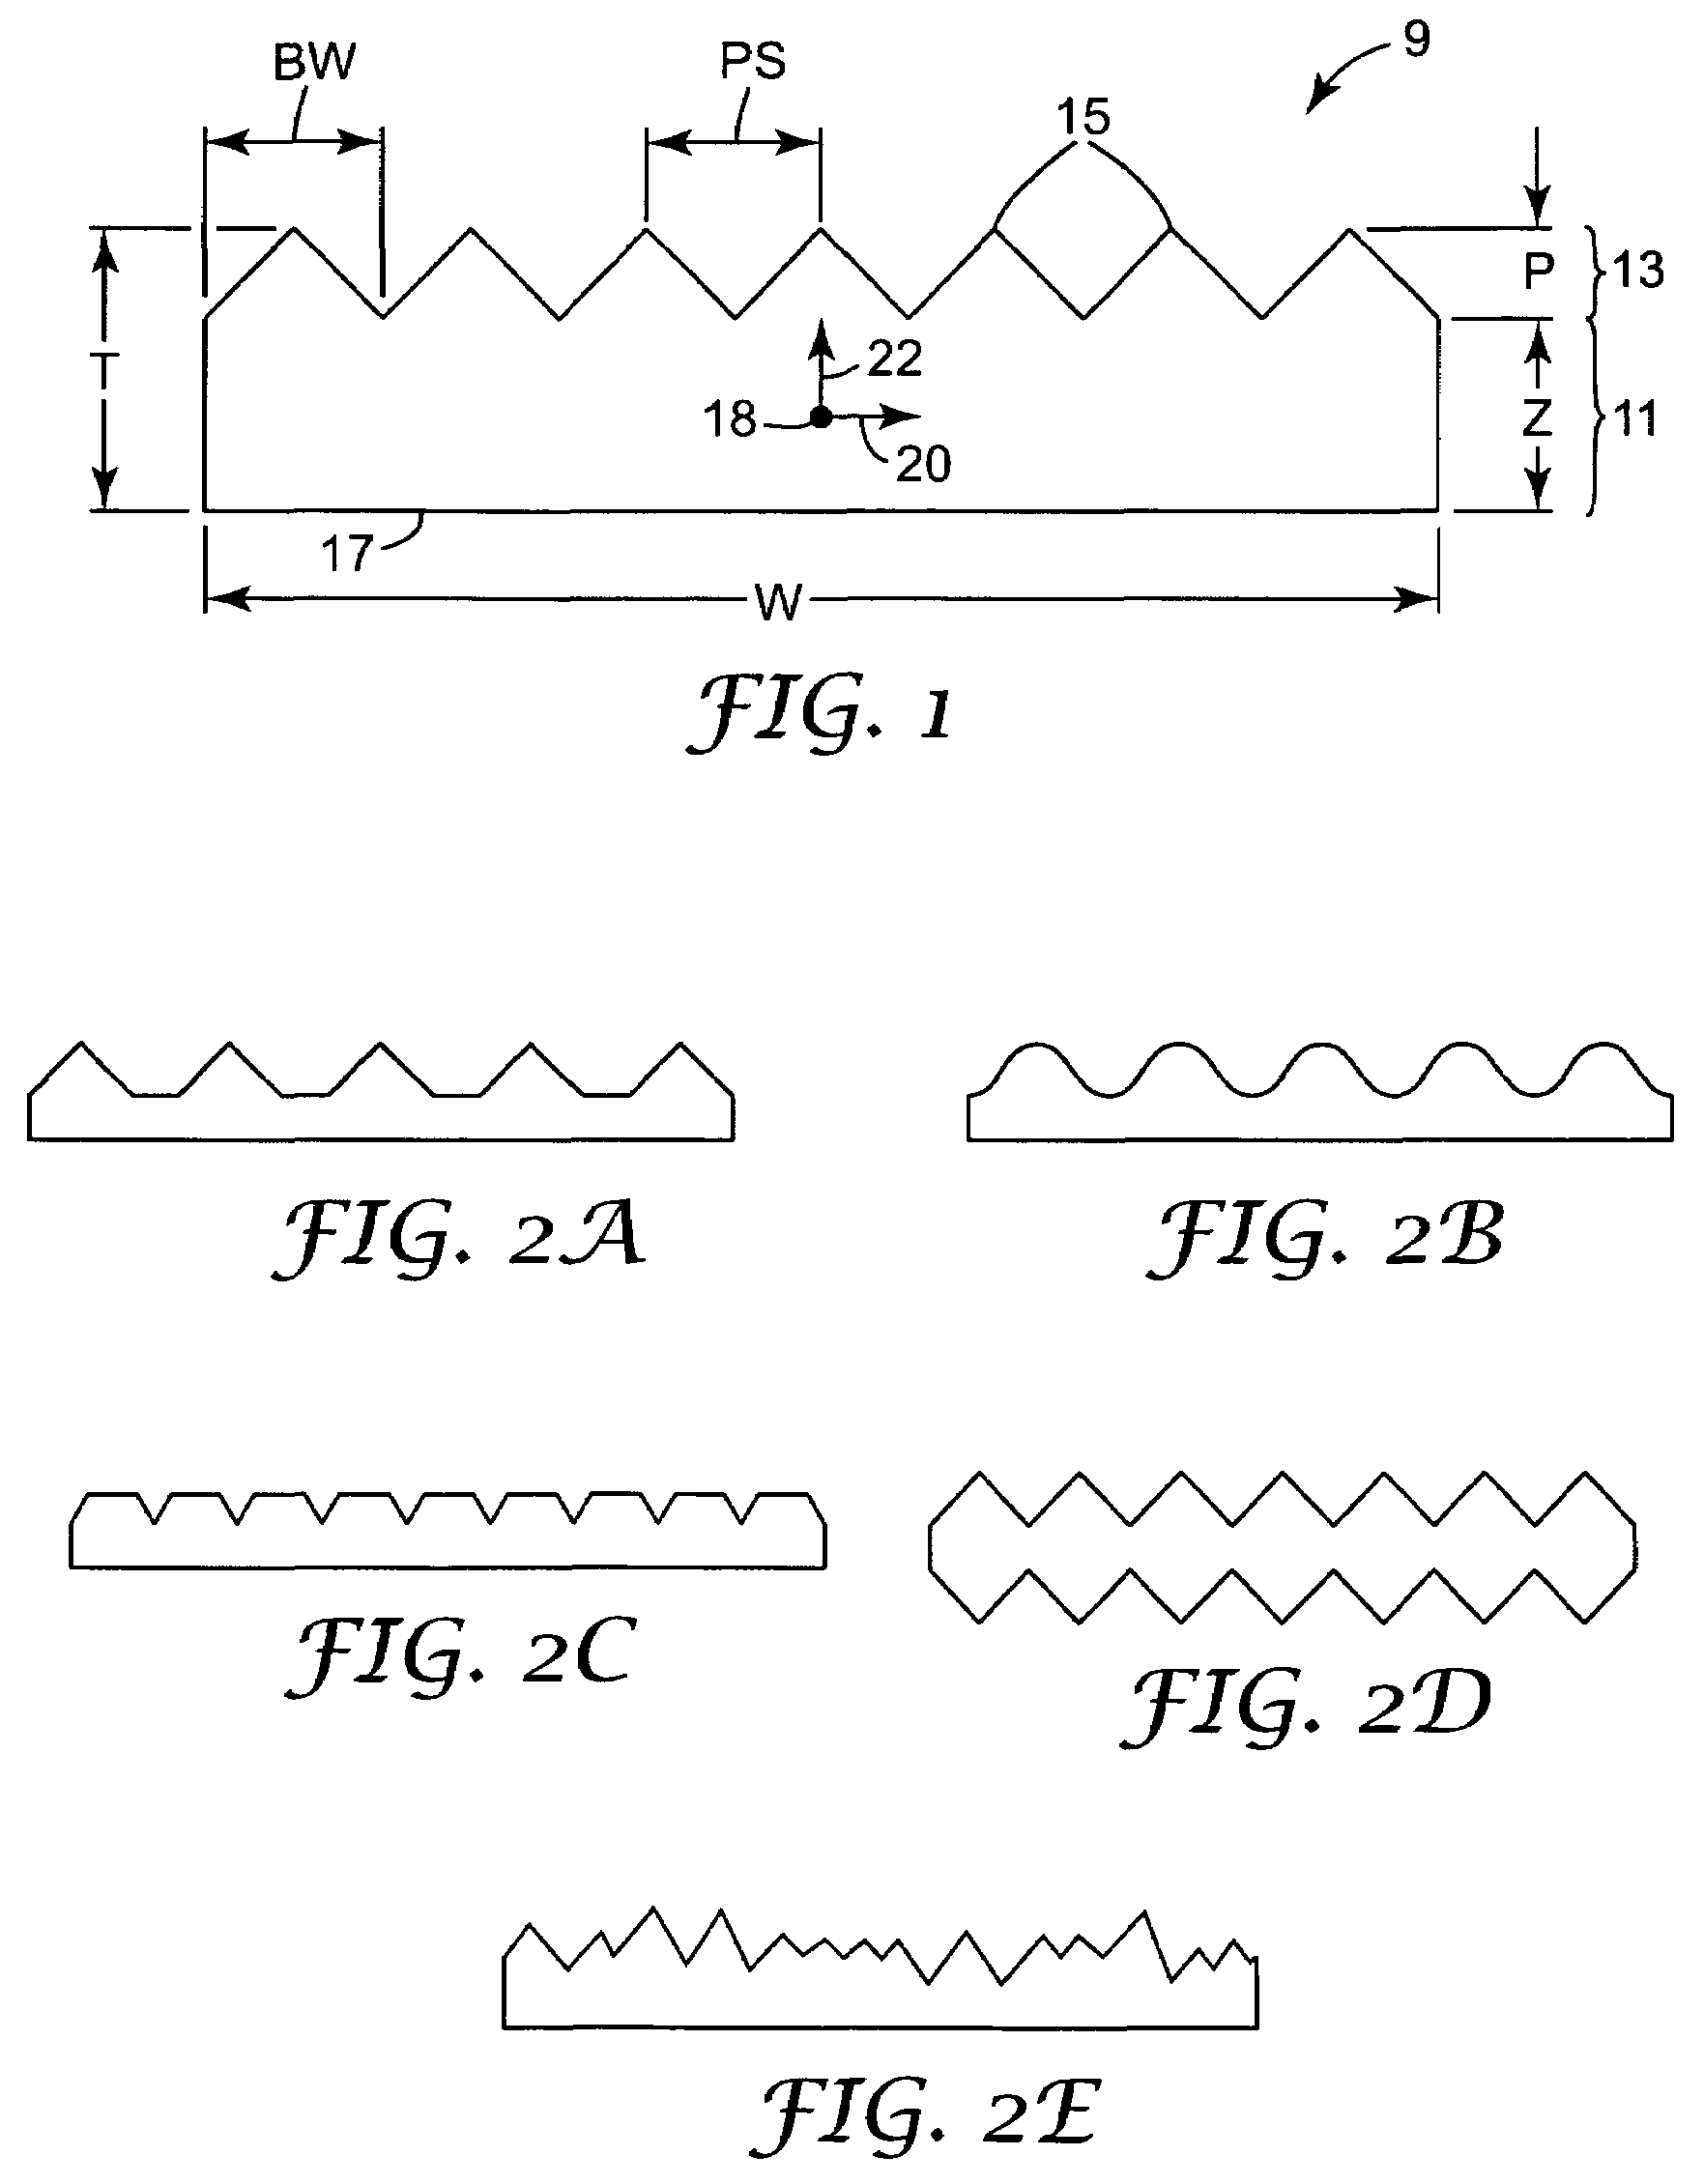 Article having a birefringent surface and microstructured features having a variable pitch or angles for use as a blur filter